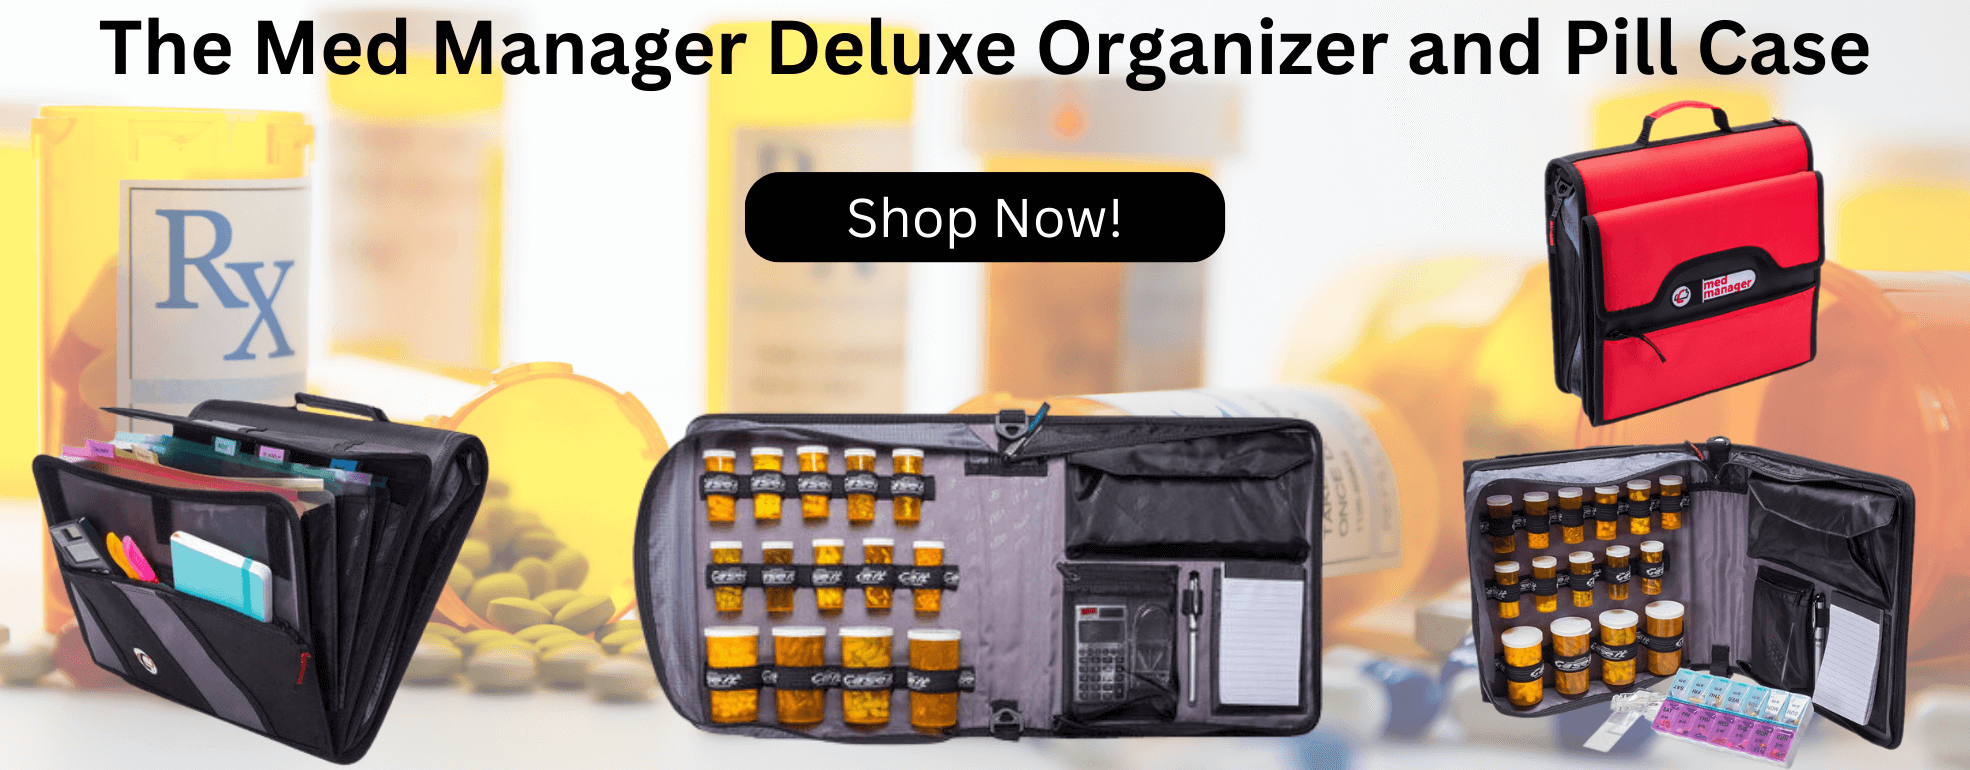 https://cdn11.bigcommerce.com/s-6dpzi5pd3/images/stencil/original/carousel/21/the_med_manager_deluxe_organizer_and_pill_case_homepage_image_1__03660.png?c=1